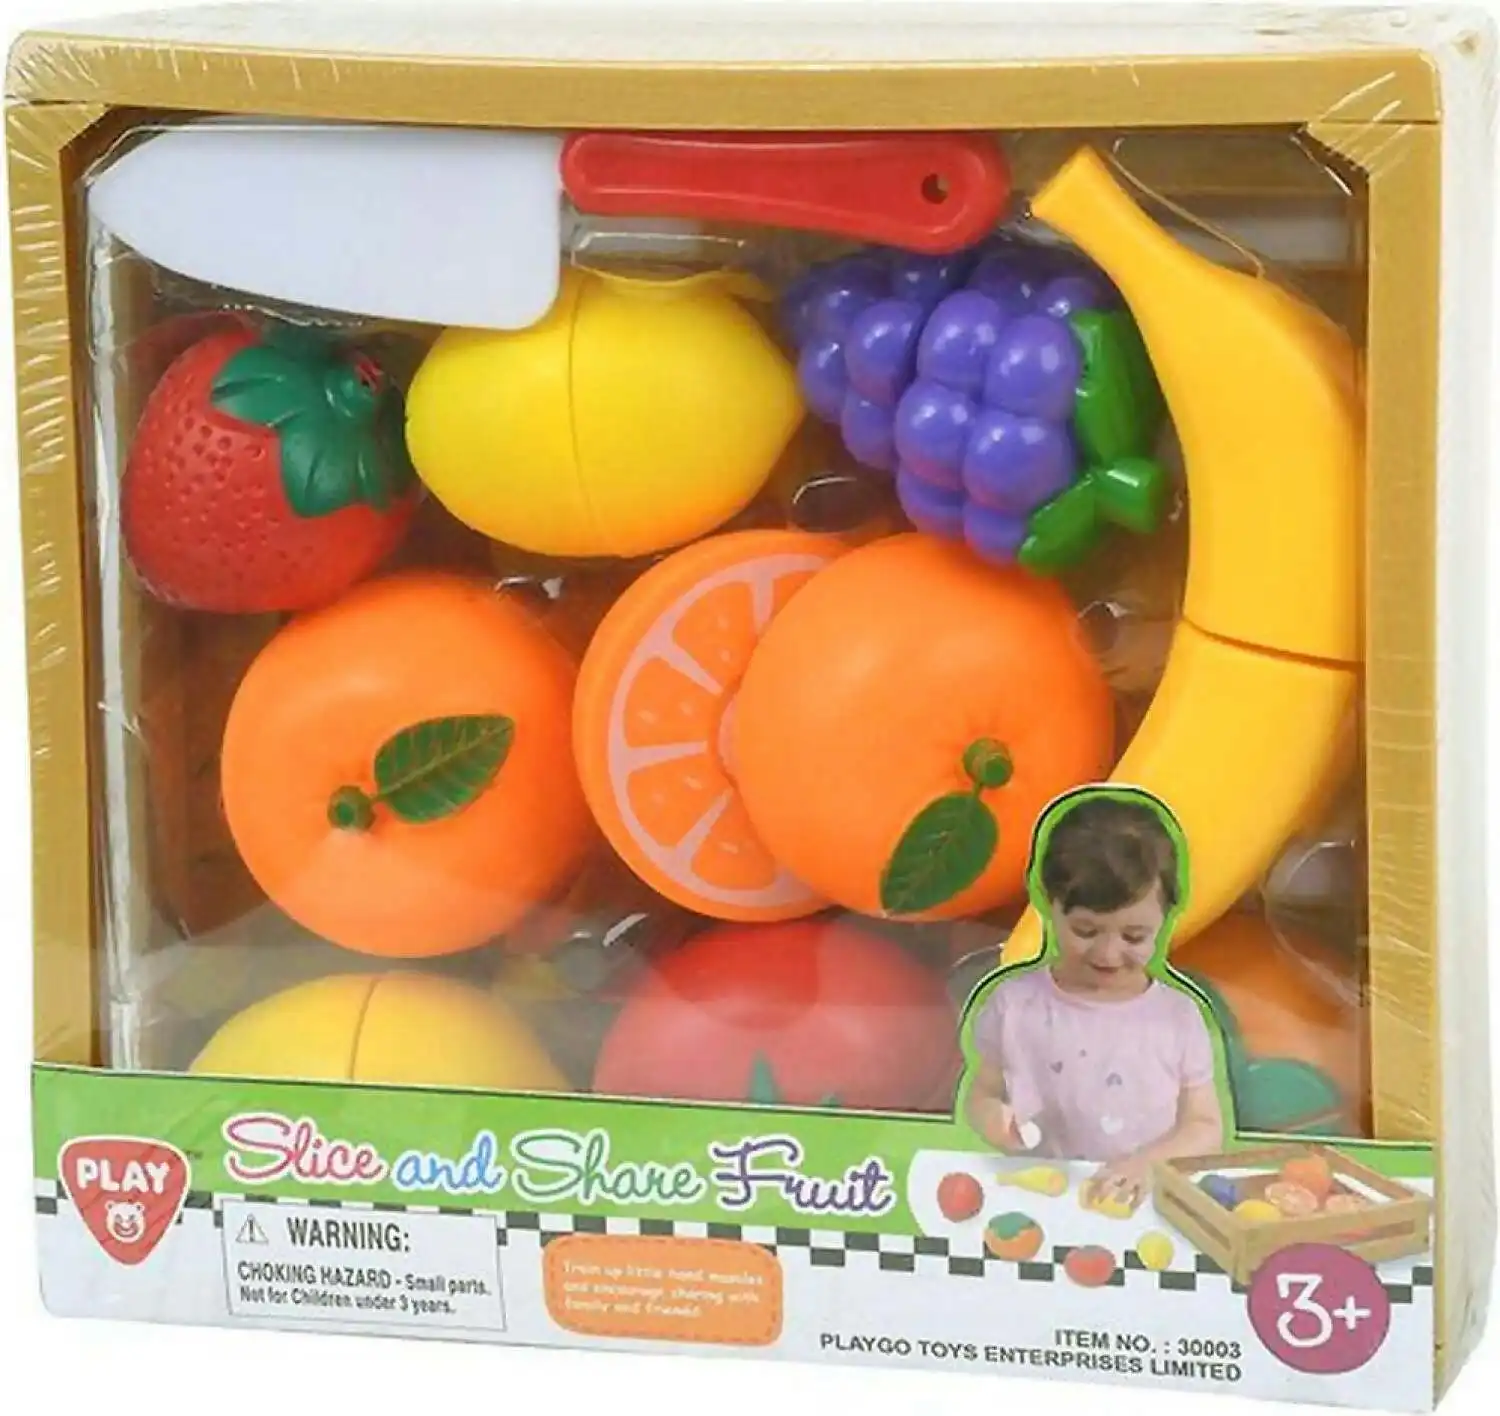 Playgo Toys Ent. Ltd. - Slice And Share Fruit 11 Piece